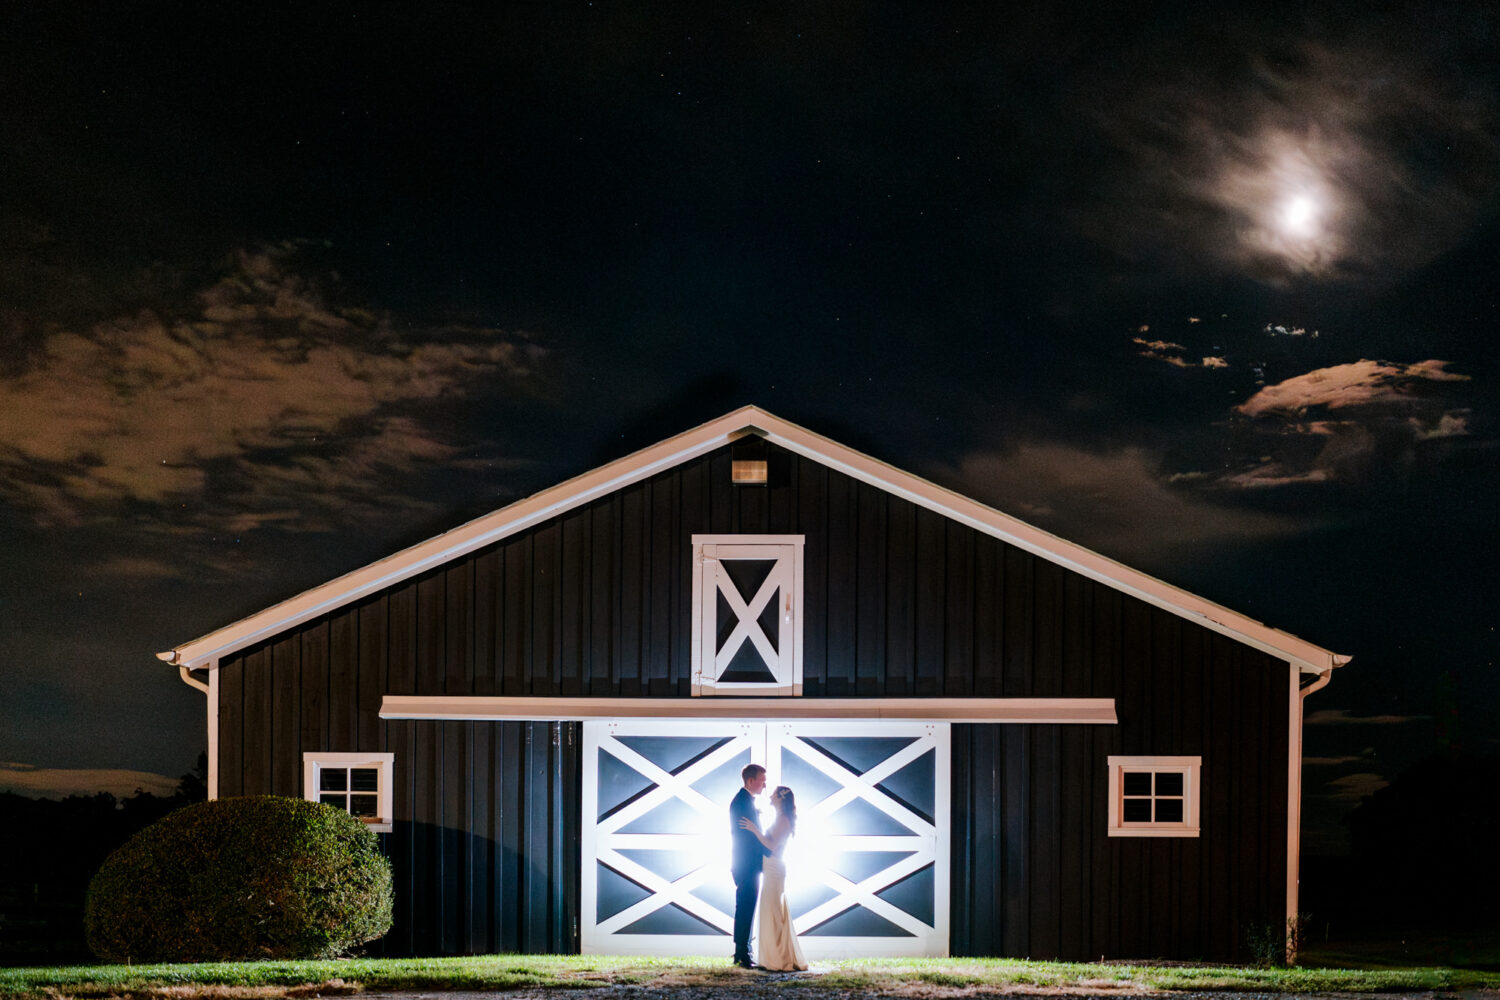 bride and groom taking a creative silhouette portrait together in the night sky during their middleburg barn wedding